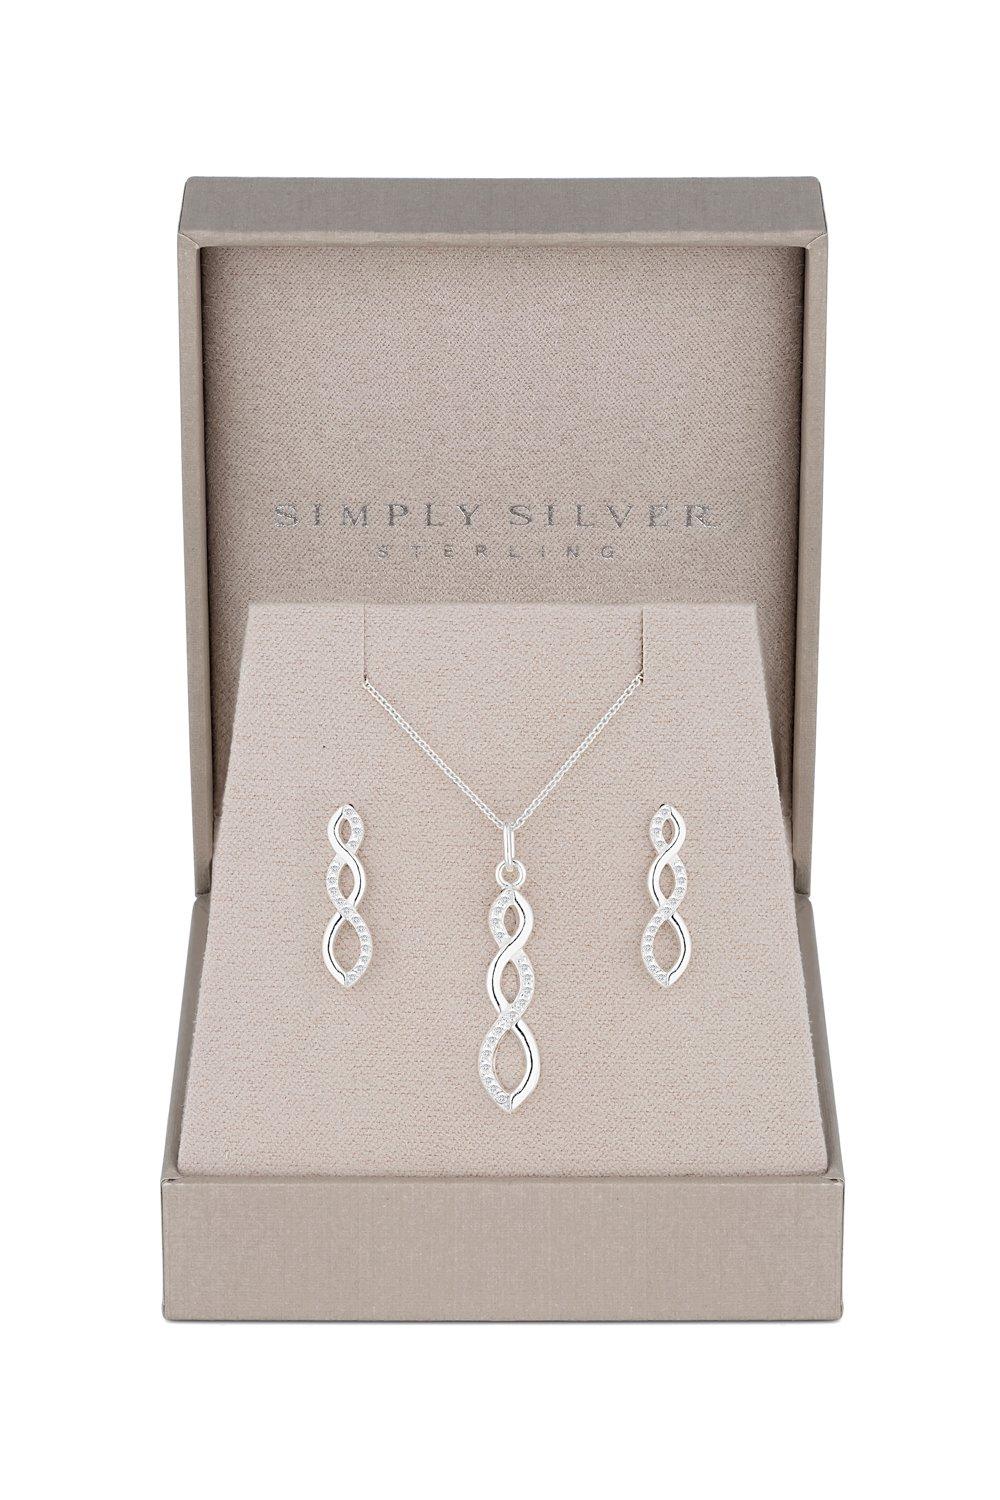 Simply Silver Women's Sterling Silver 925 Cubic Zirconia Infinity Set - Gift Boxed|silver